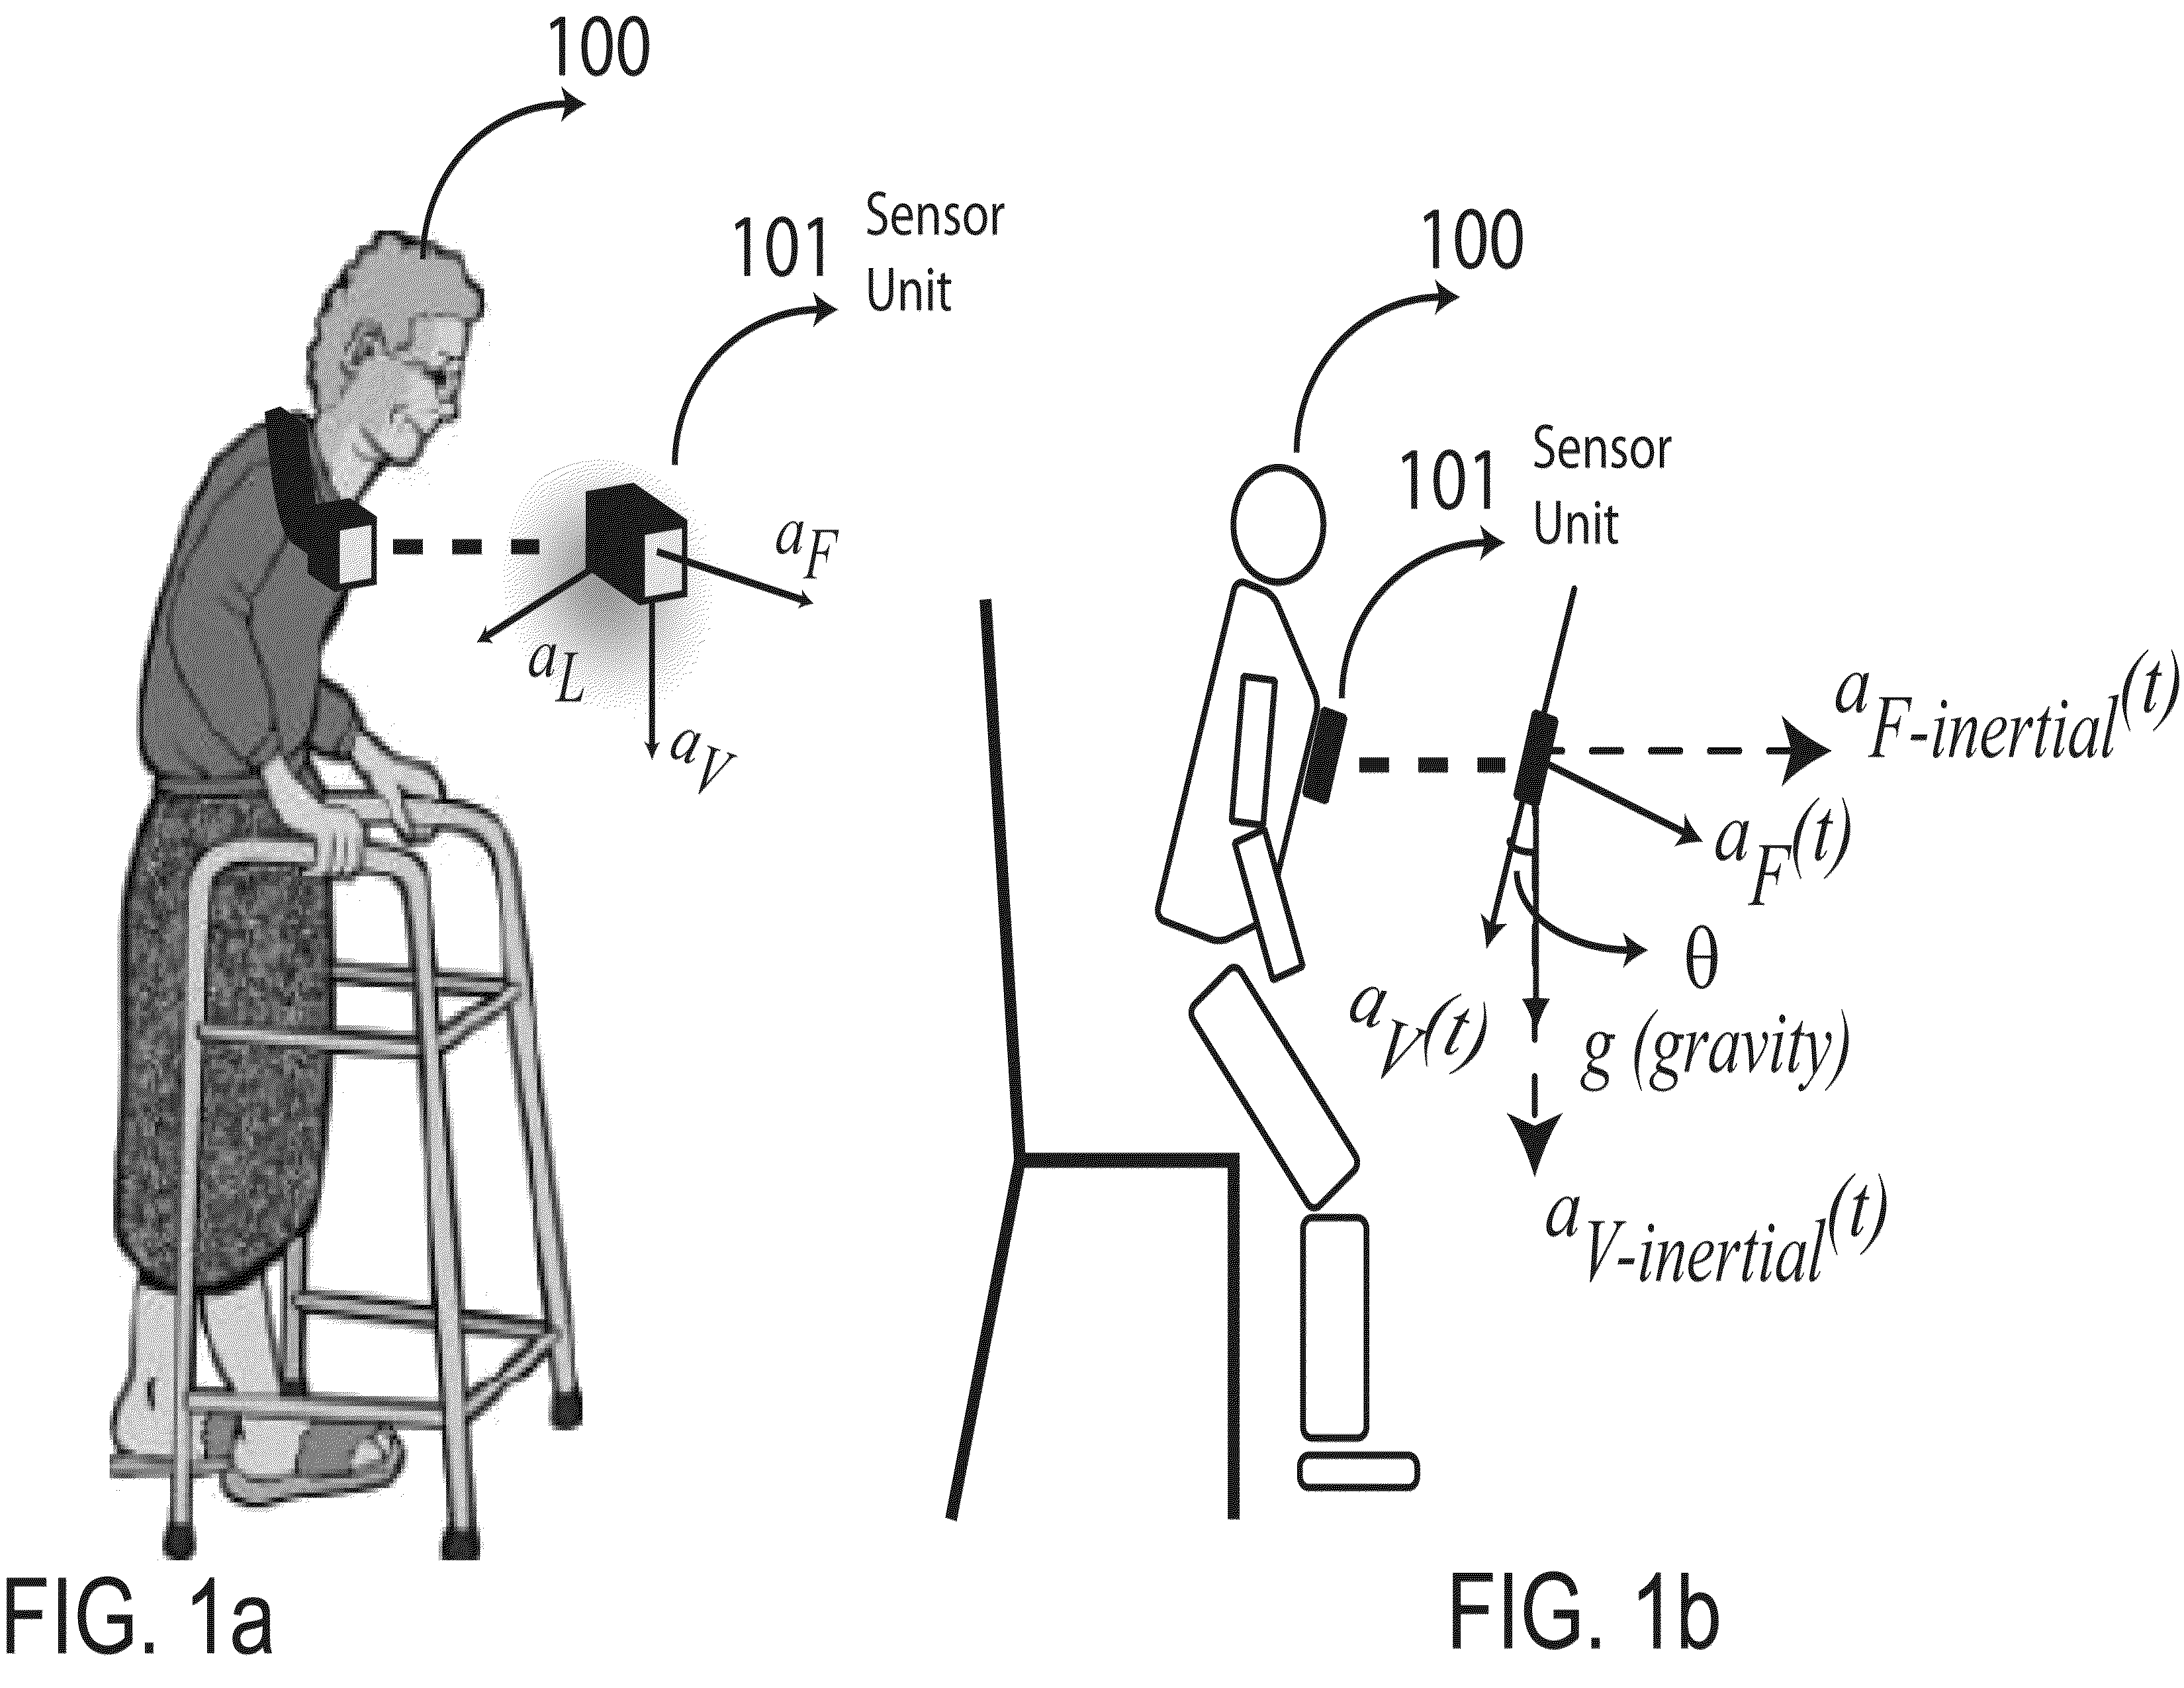 Ambulatory system for measuring and monitoring physical activity and risk of falling and for automatic fall detection